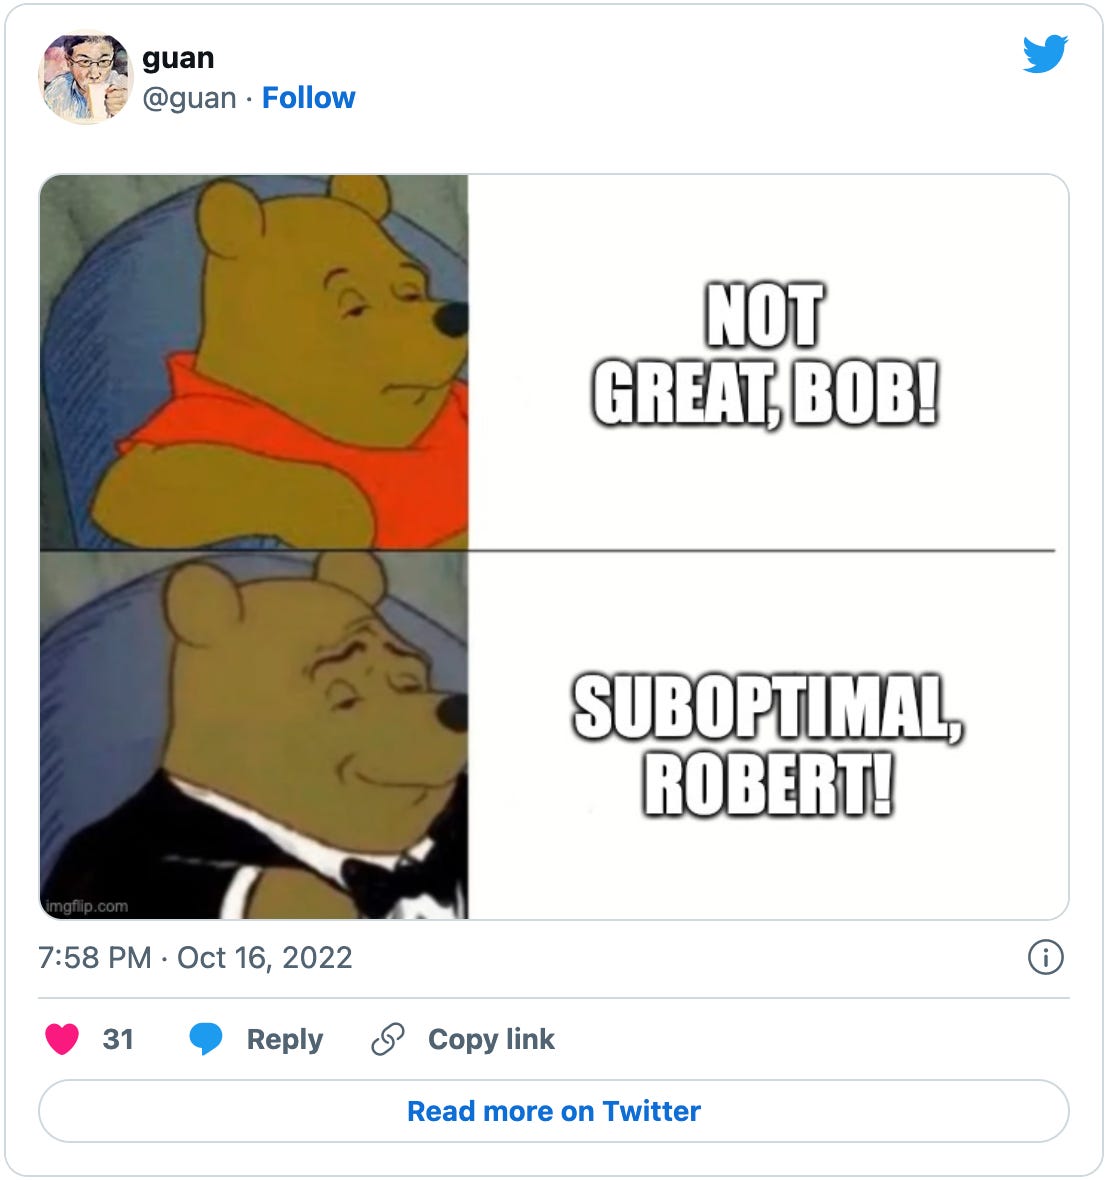 Tweet by @guan with a Winnie the Pooh meme. Schlub normie Pooh is labeled “Not Great, Bob!” while suave fancy Pooh is labeled “Suboptimal, Robert!”